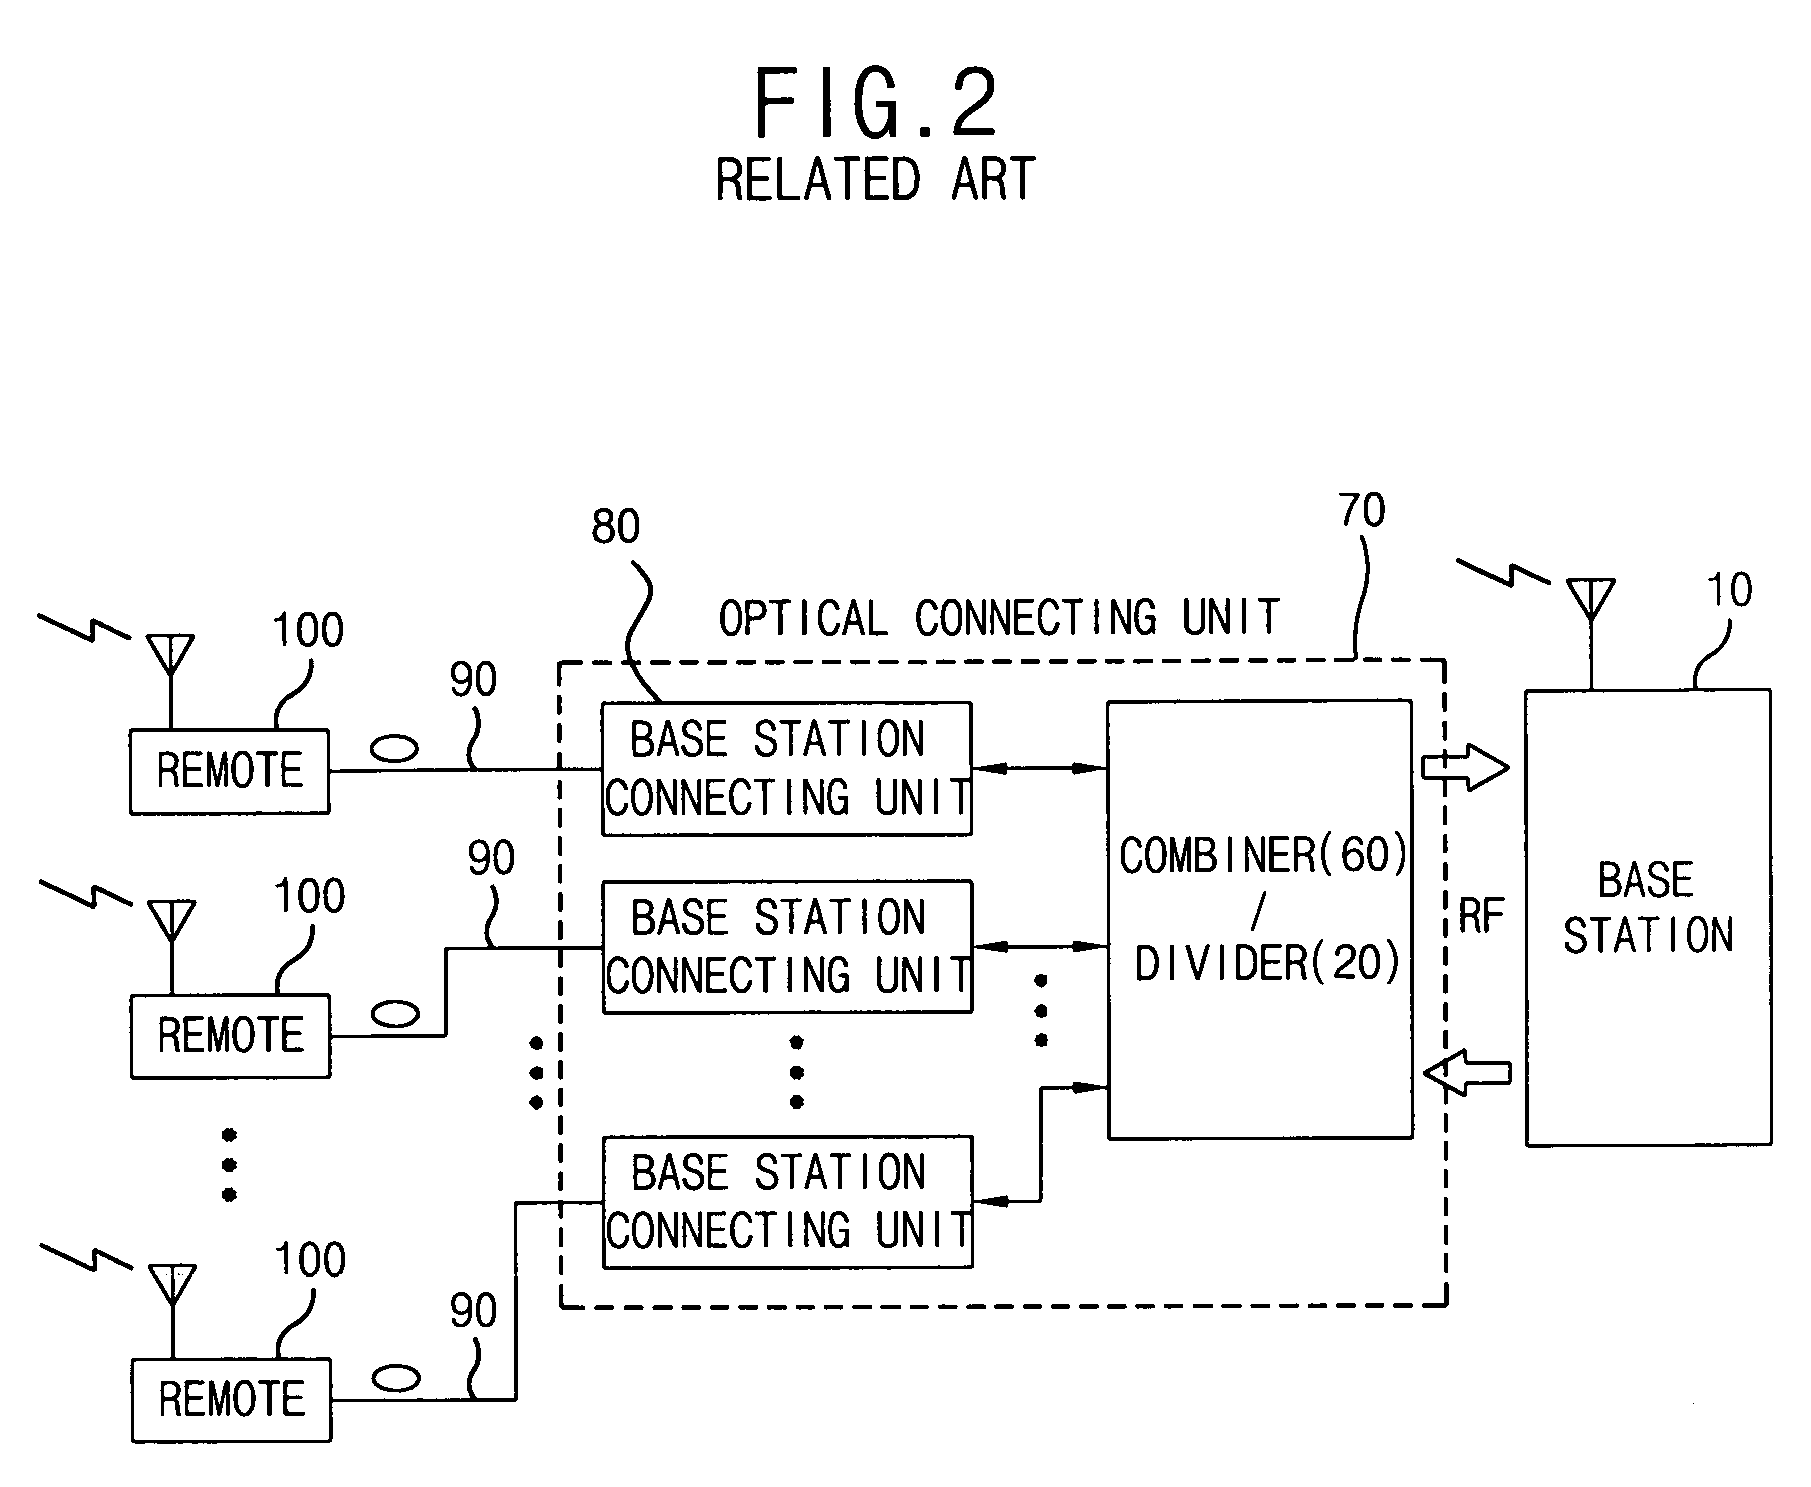 Signal transmission apparatus and method for optical base station